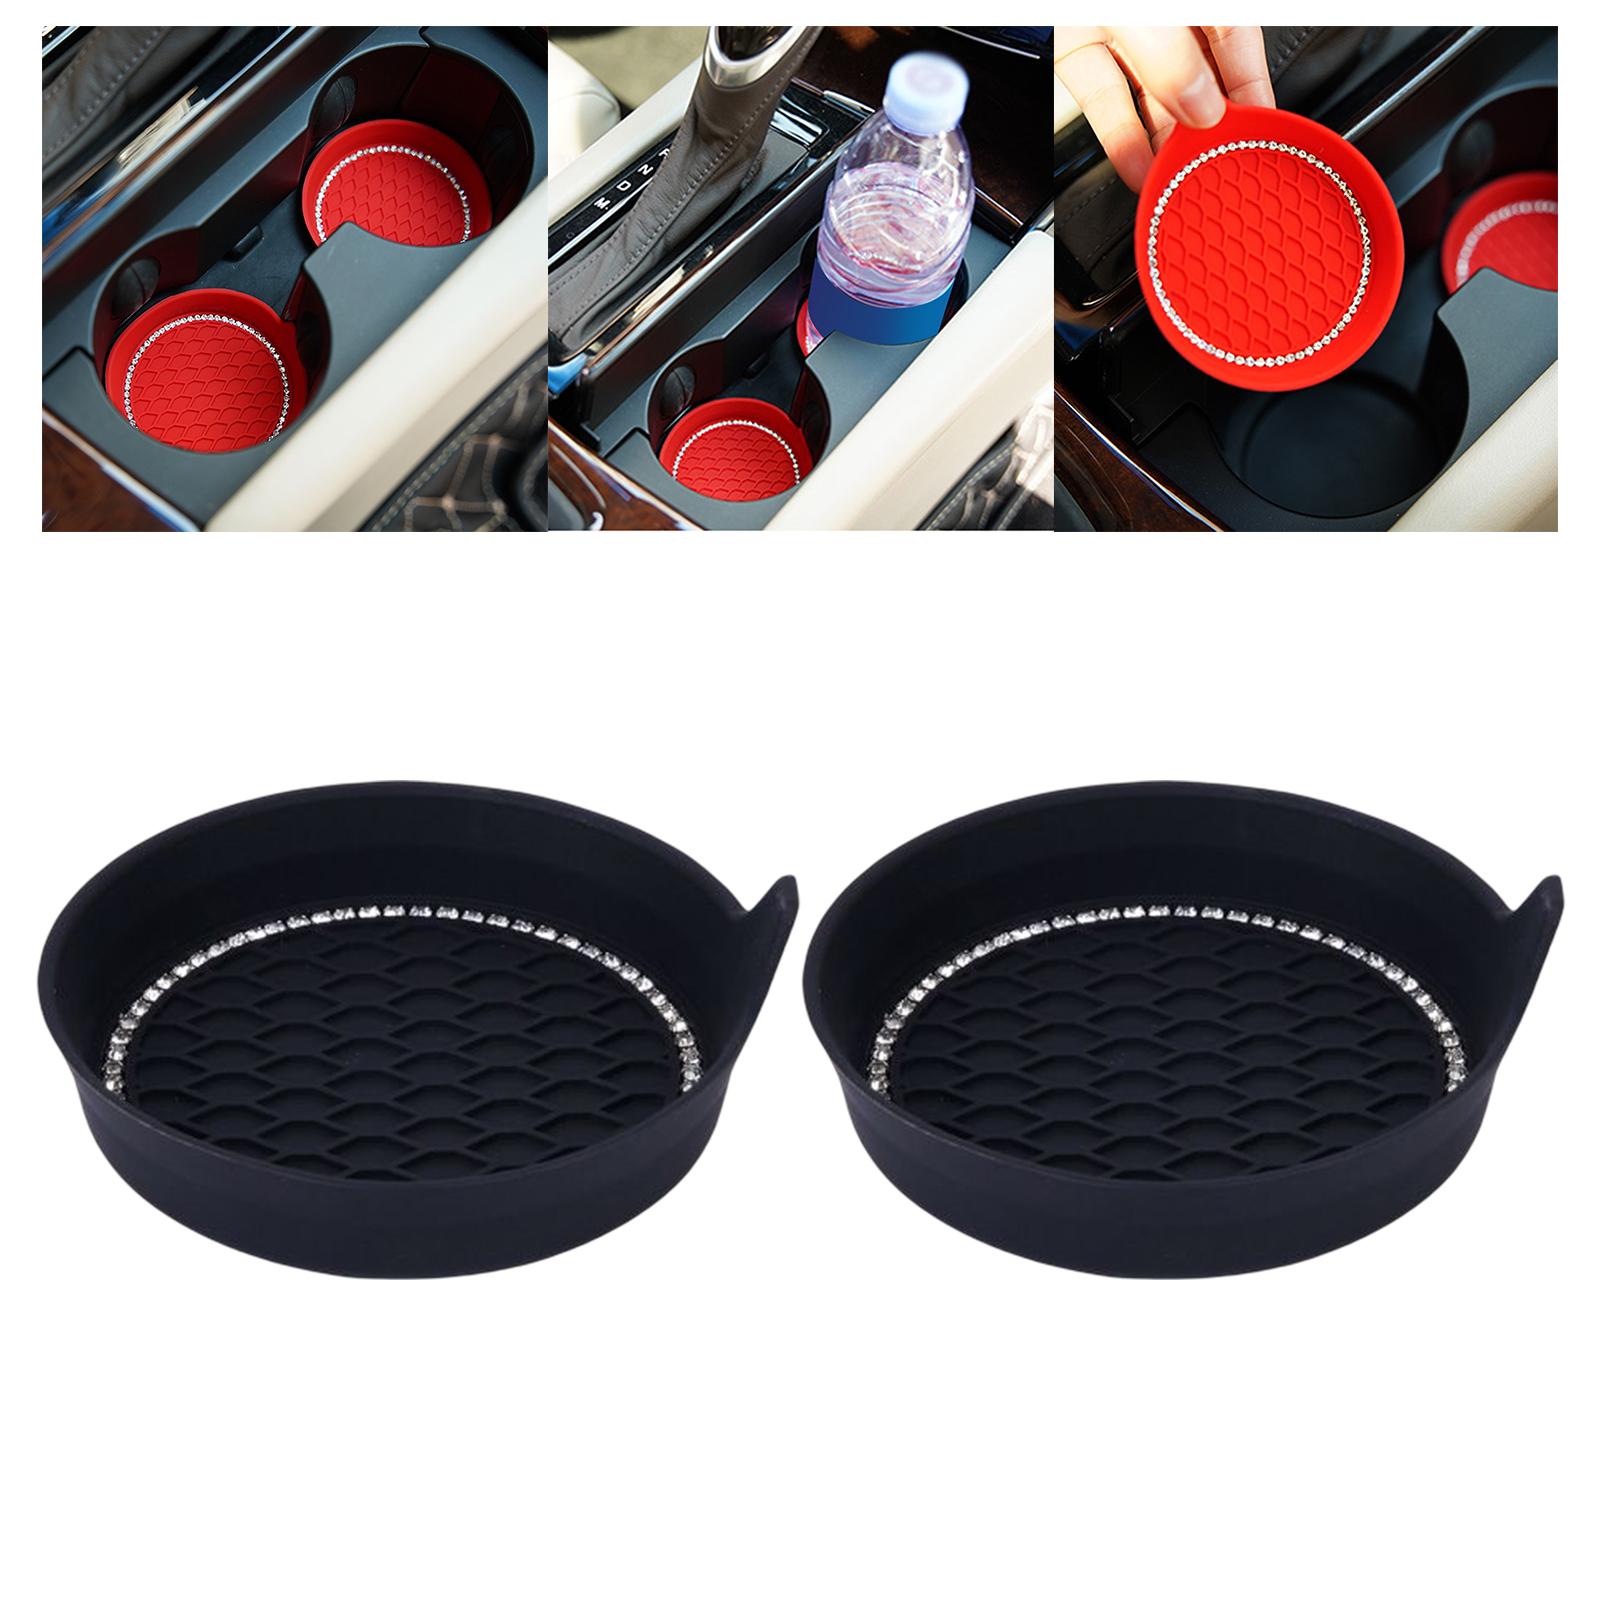 Auto Cup Insert Coaster round Vehicle Cup Mats for Party Office RV Black